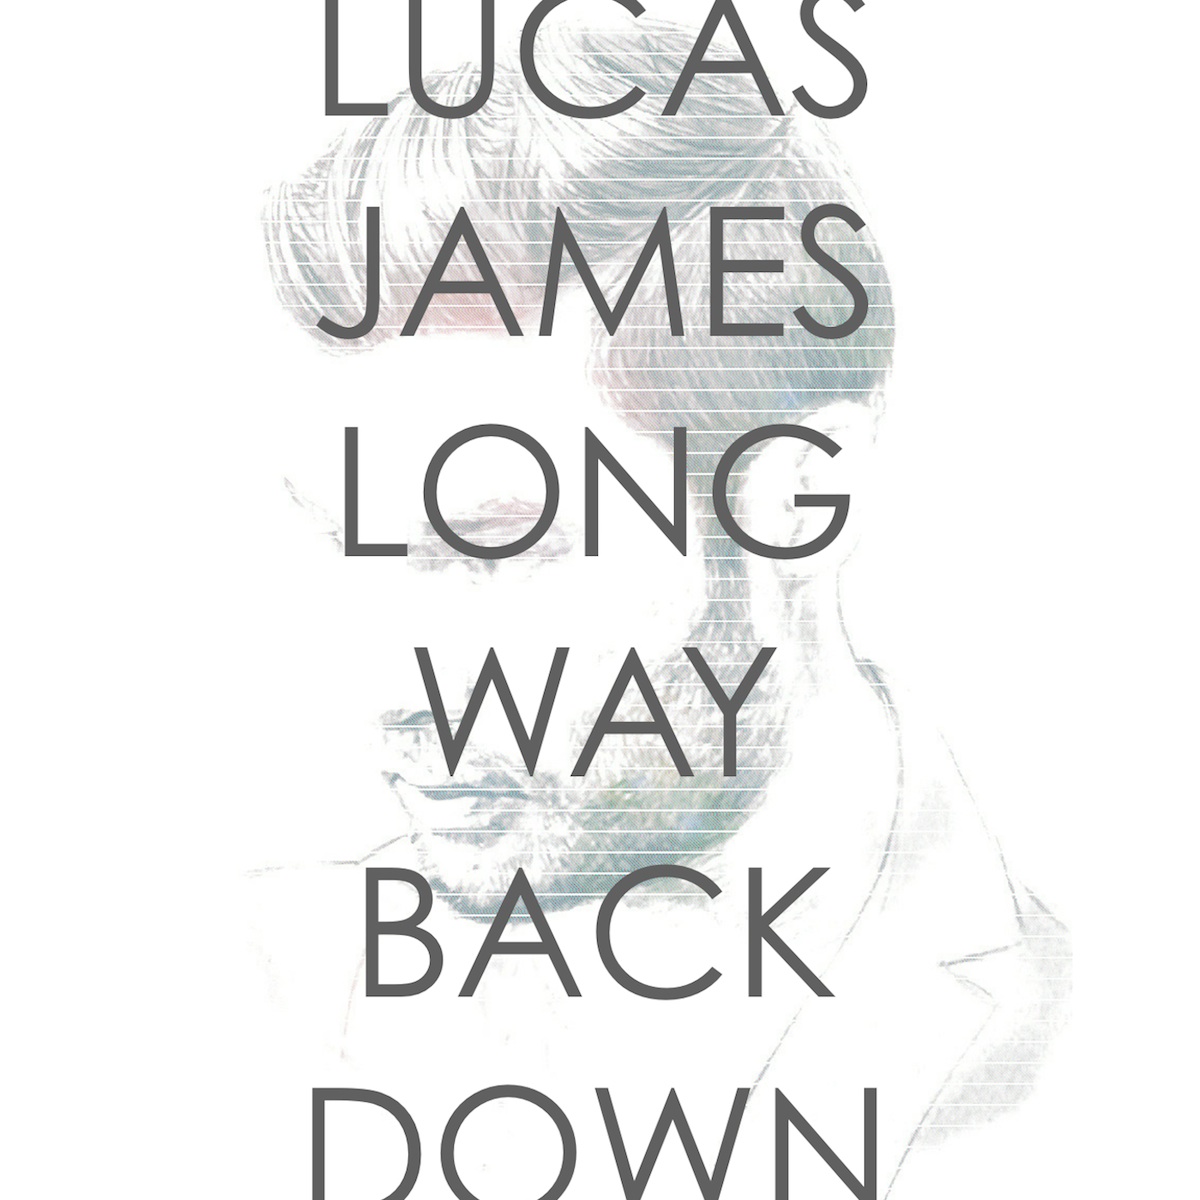 Longing for down. James Lives a long way from the. Album Art download it's a long way back.